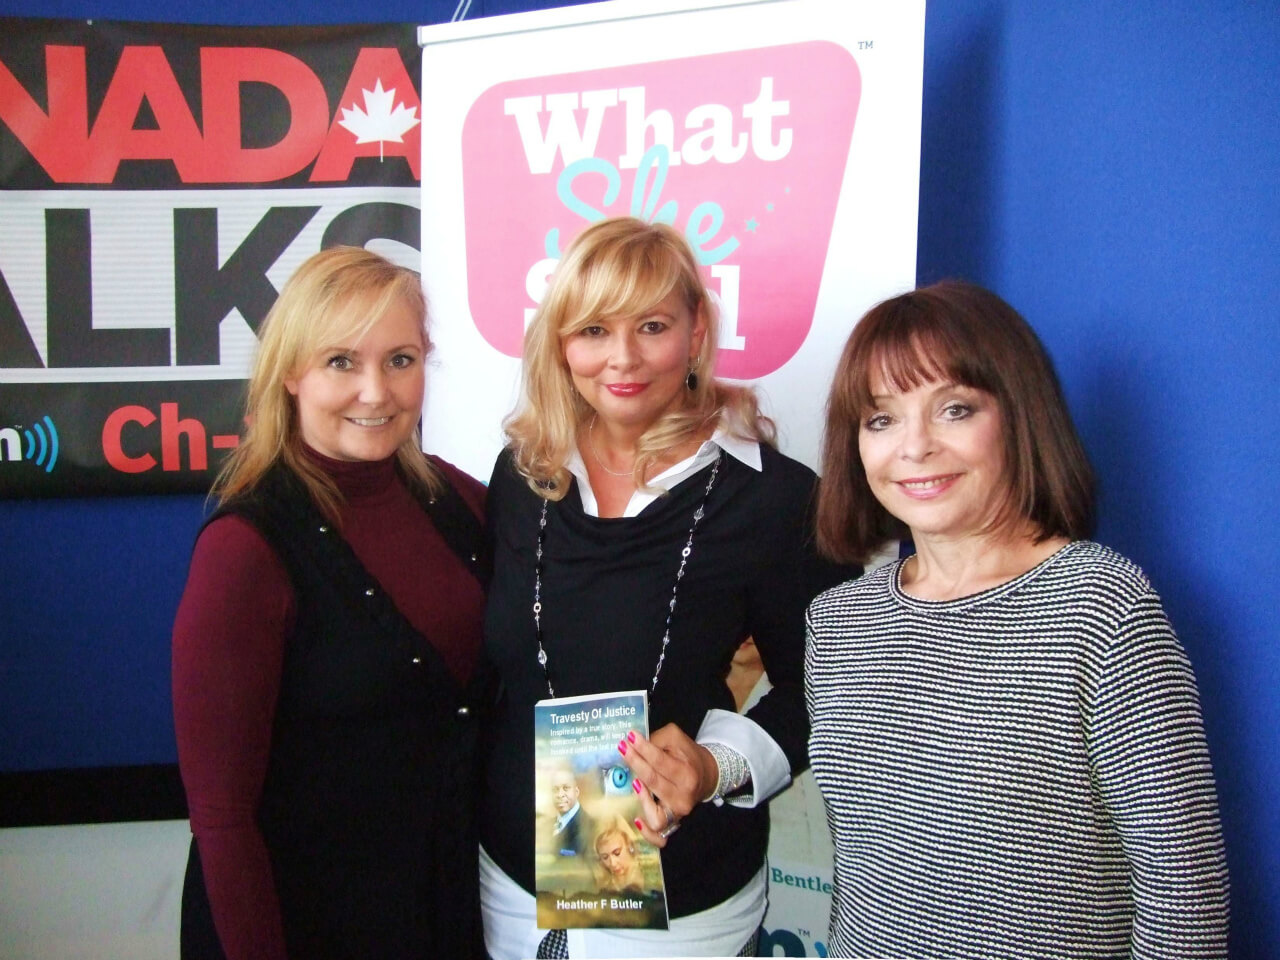 My interview with Christine Bentley and Sharon Caddy on their show What She Said on sirus xm Radio channel 167